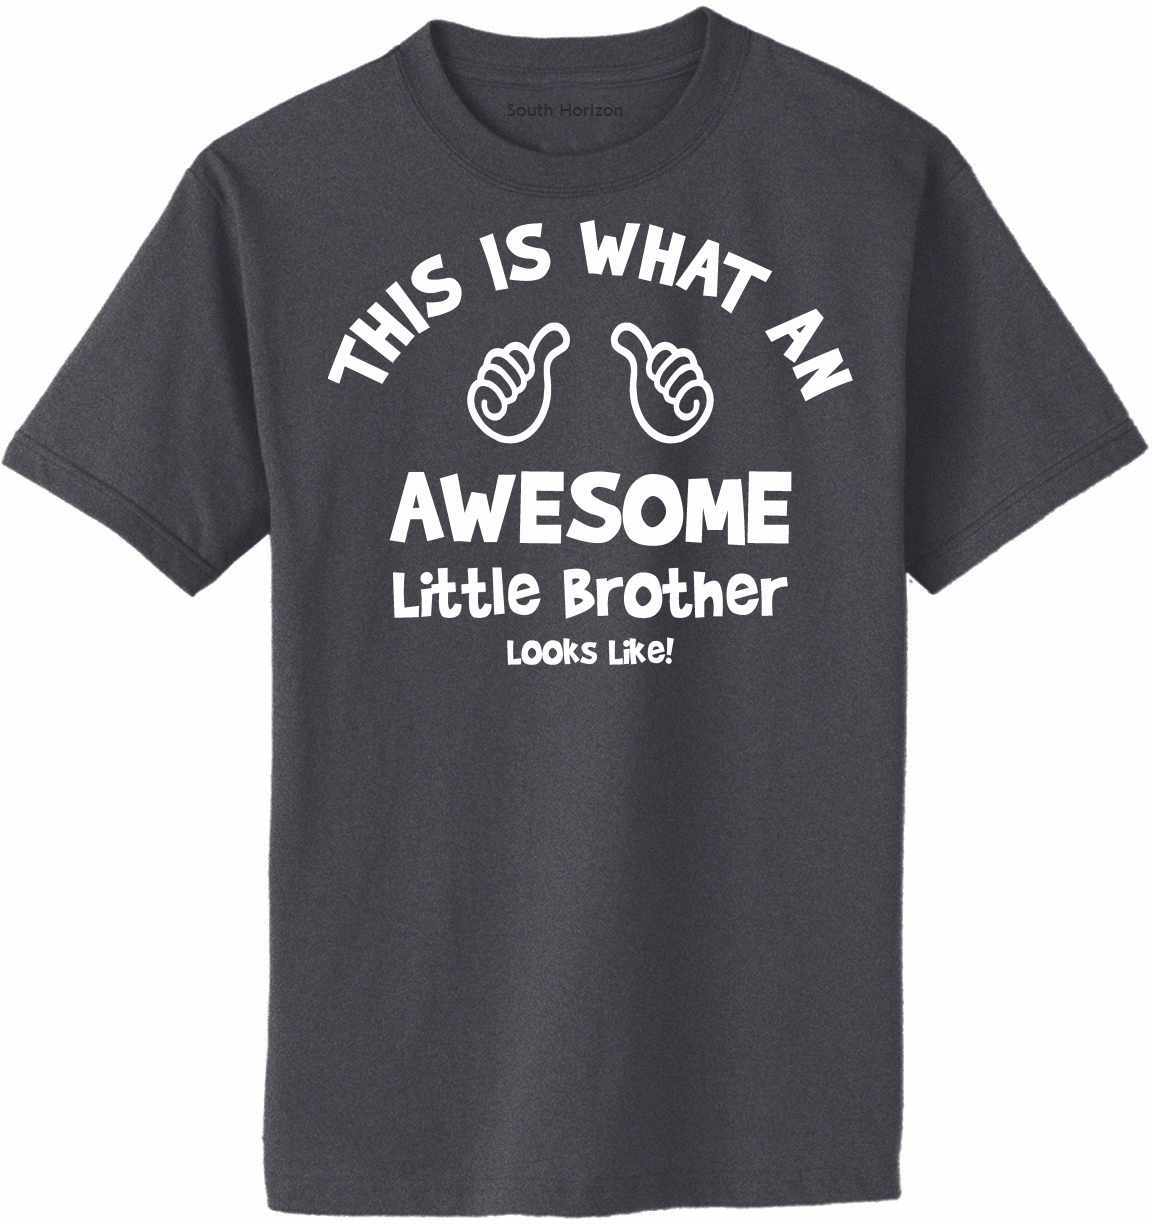 This is What an AWESOME LITTLE BROTHER Looks Like Adult T-Shirt